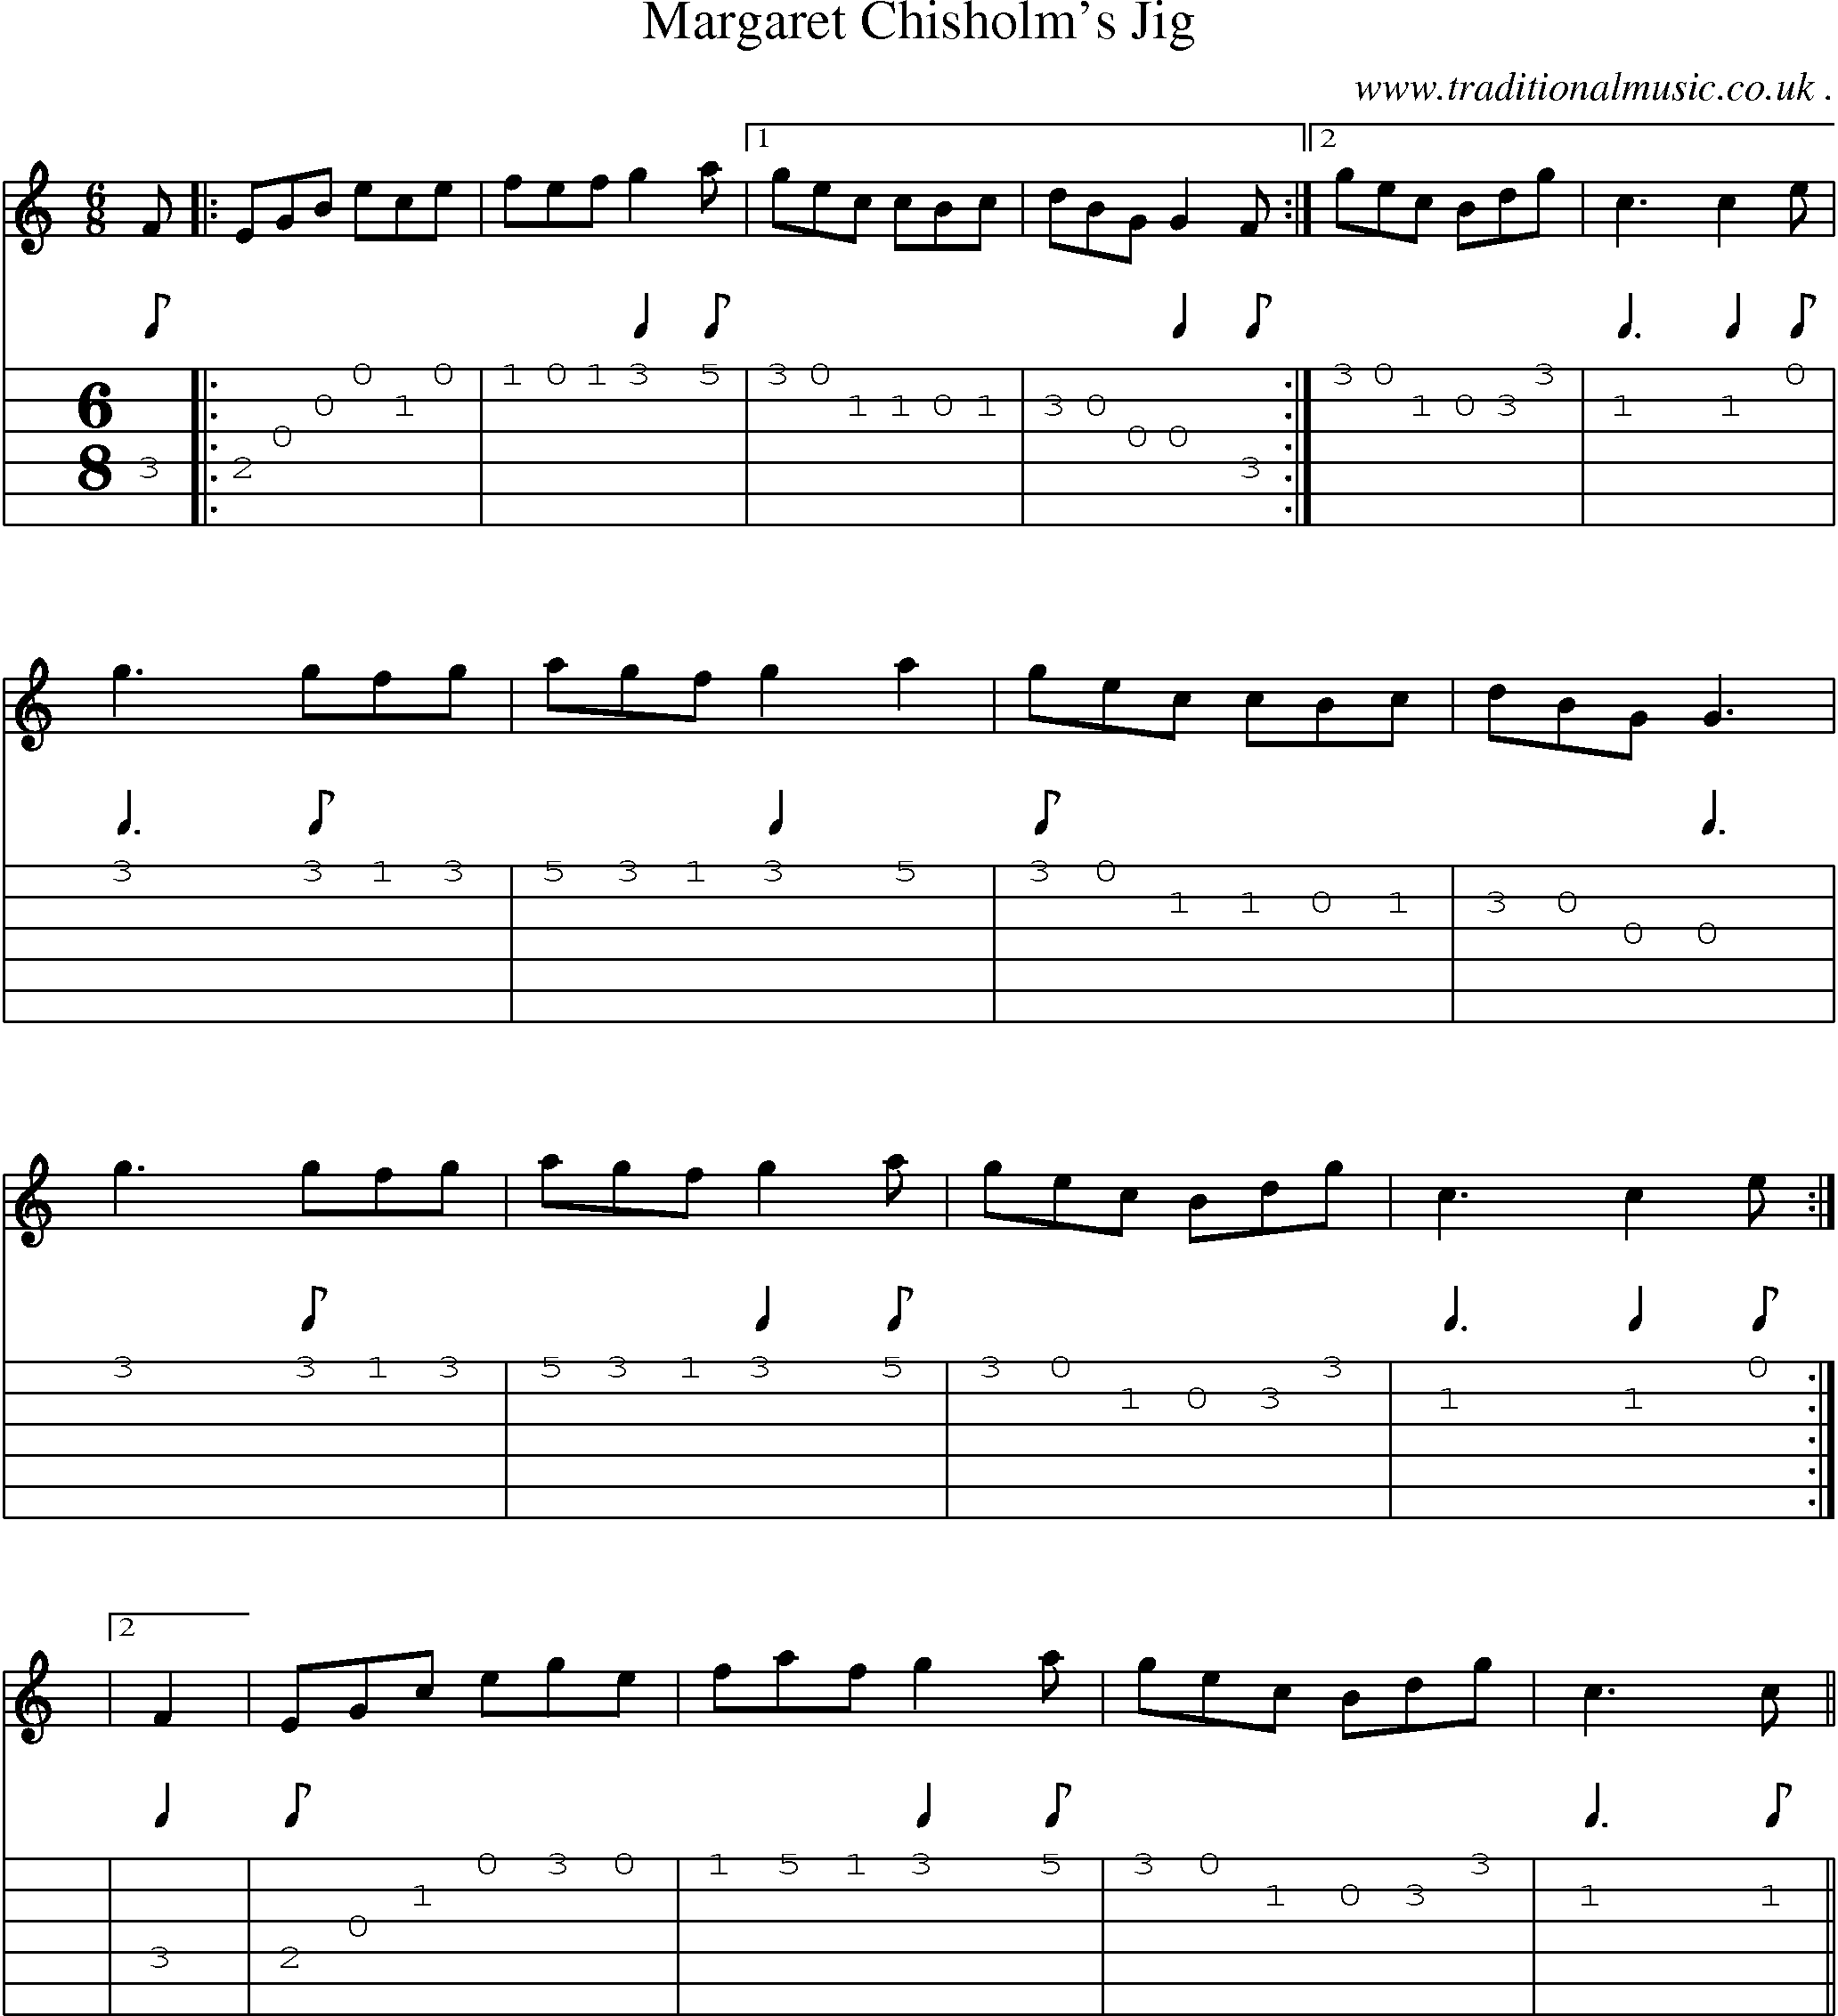 Sheet-Music and Guitar Tabs for Margaret Chisholms Jig